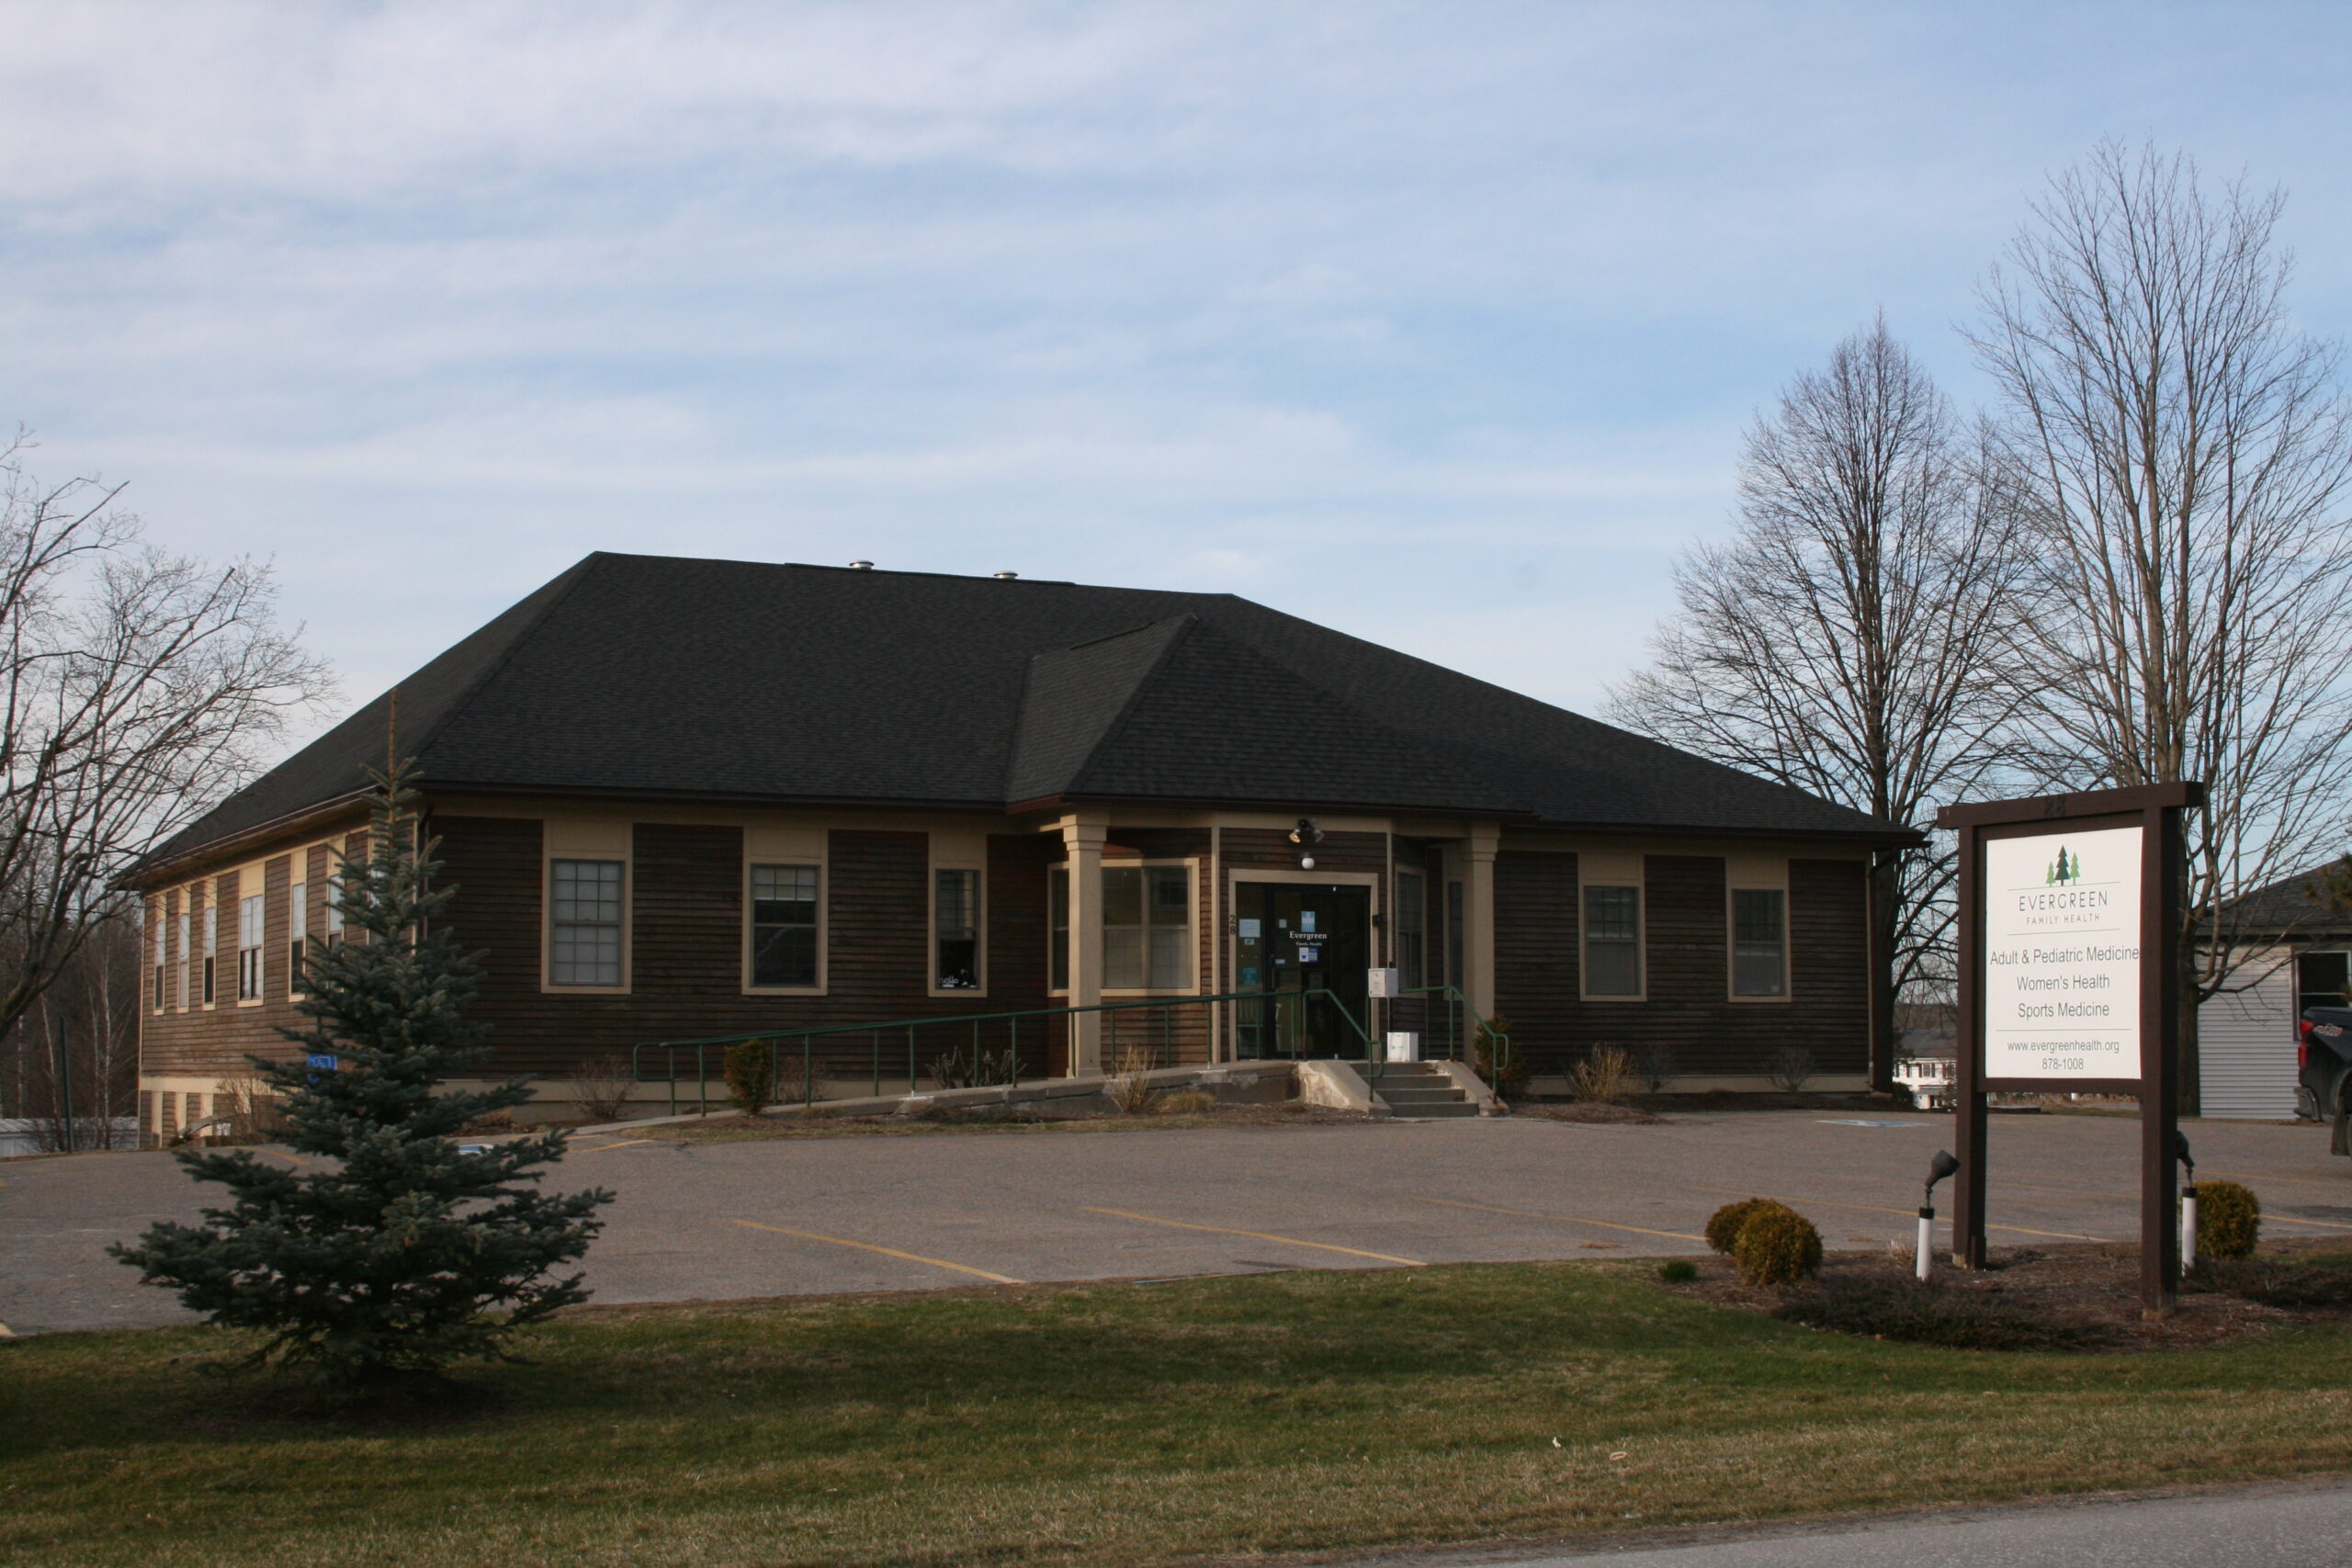 Office space for rent at 28 Park Avenue in Williston, VT, with a large parking lot.